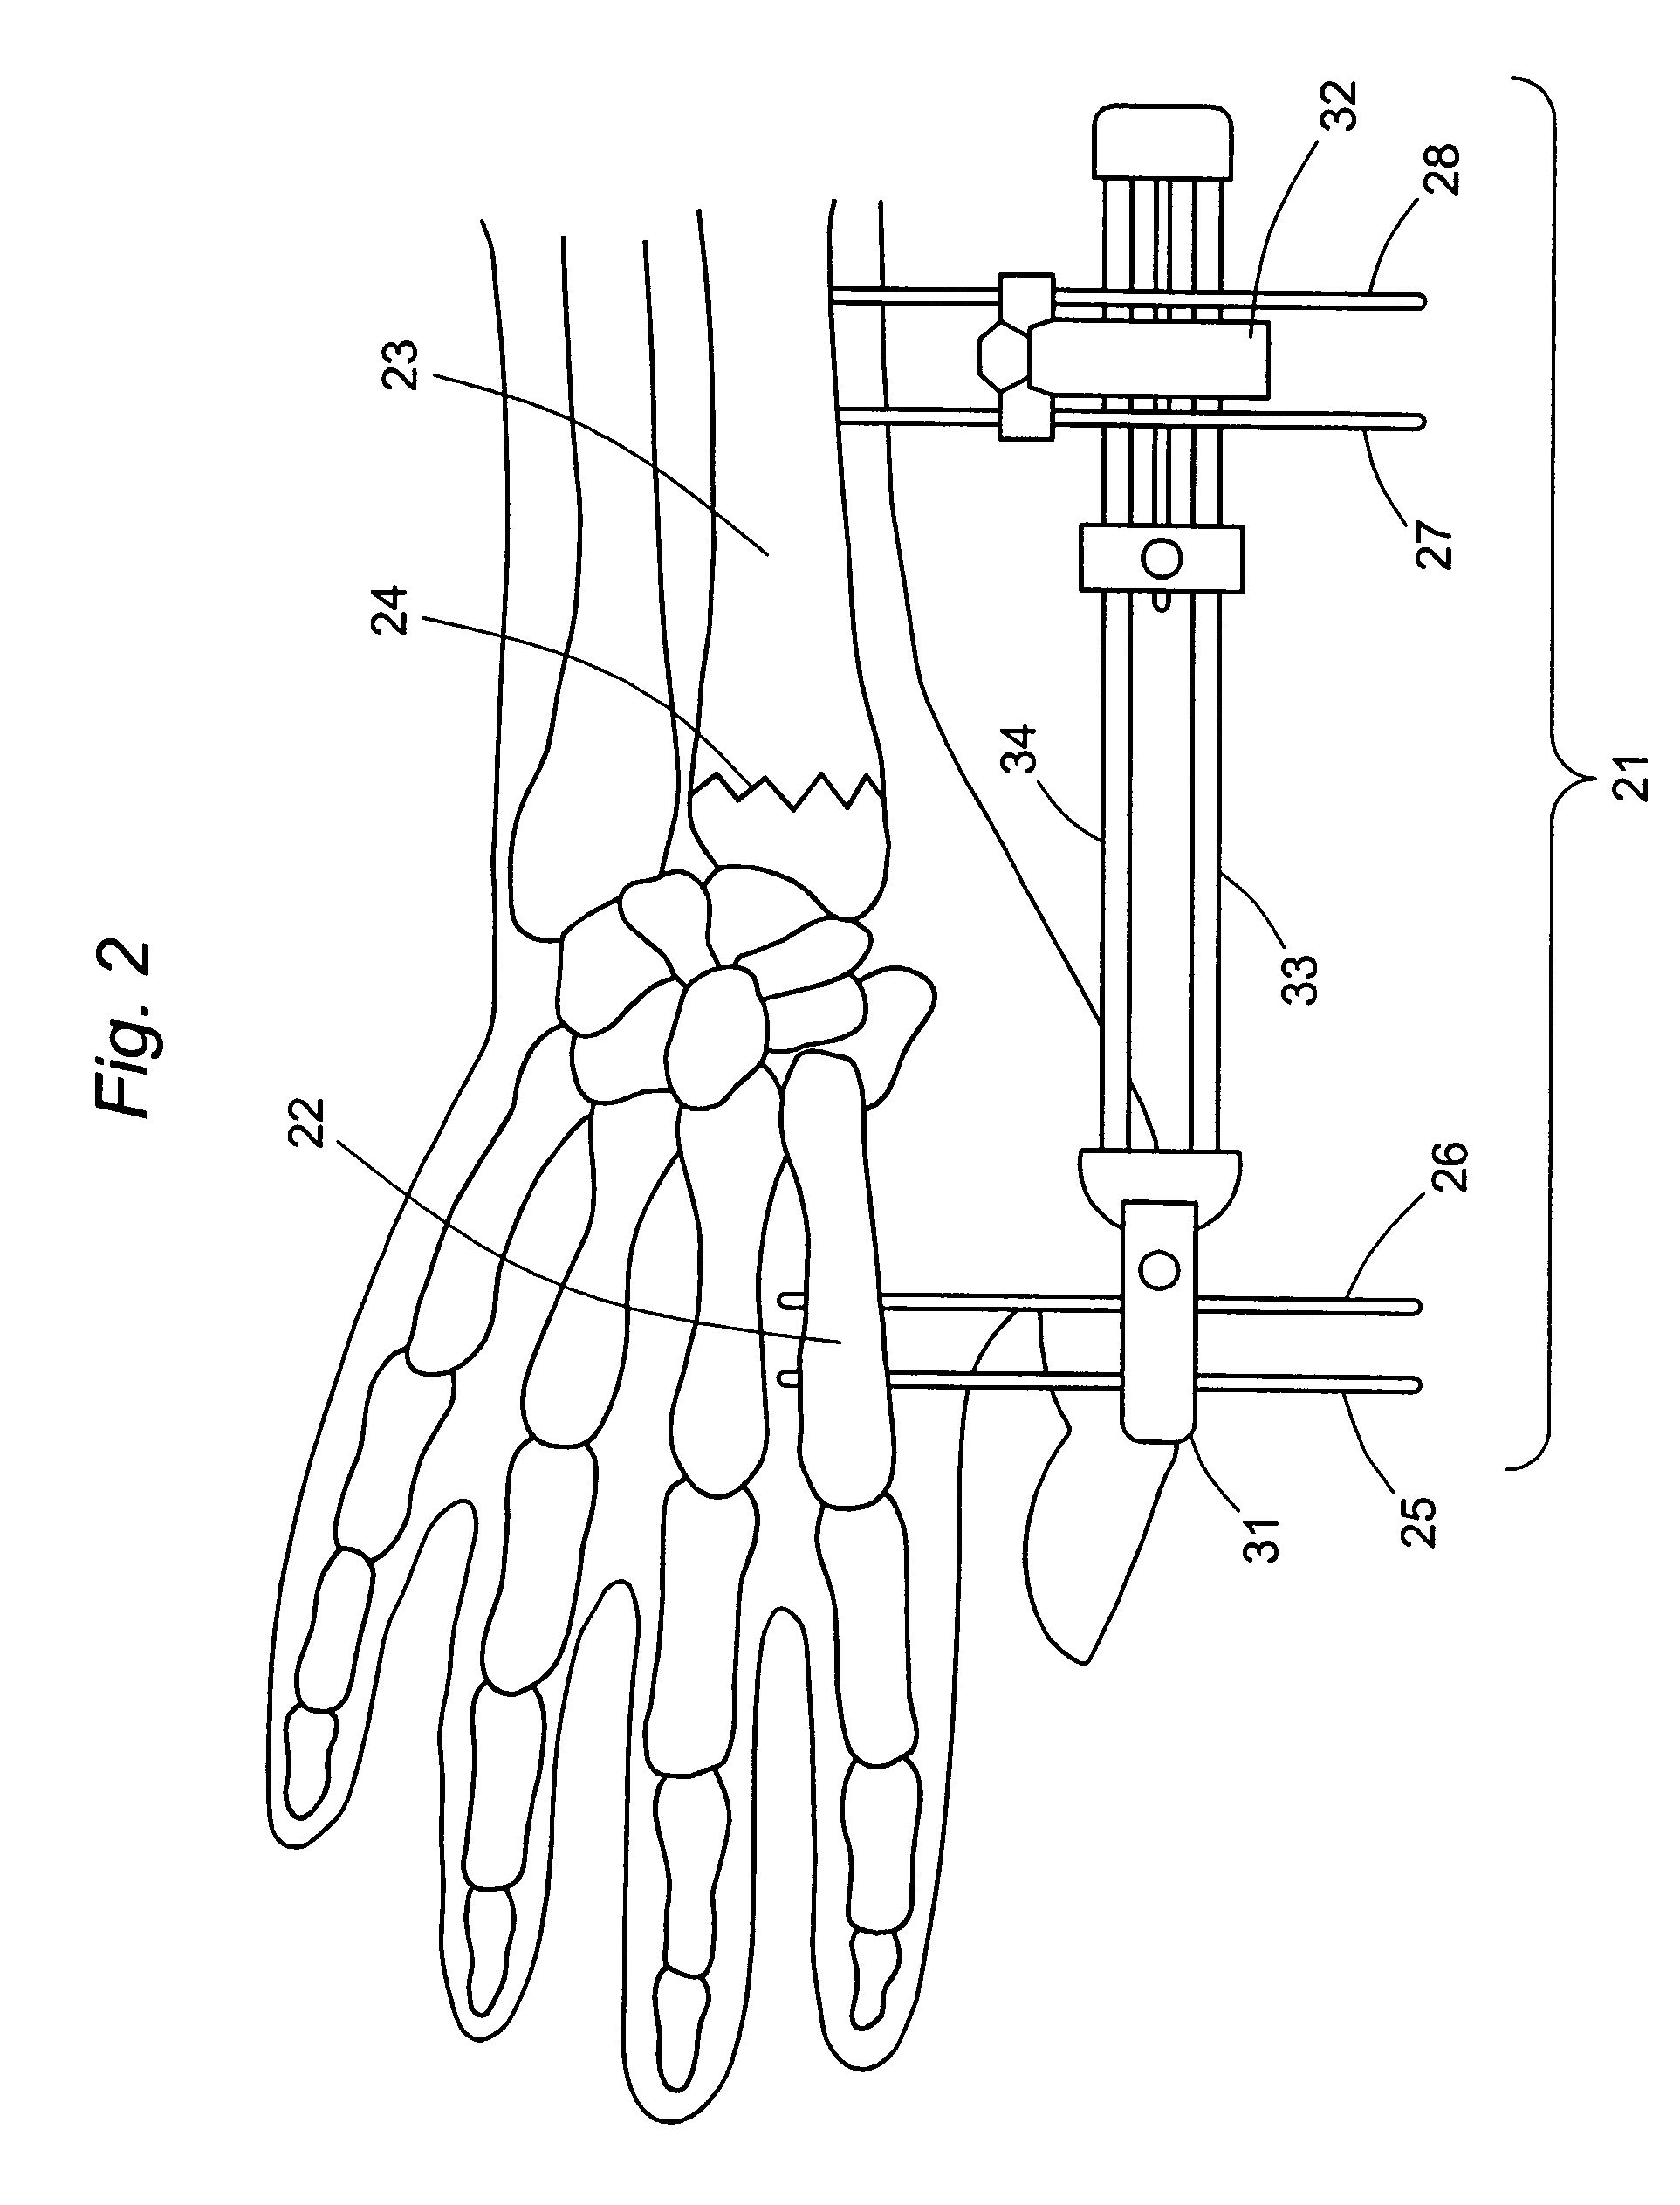 External fixator for Colles' fracture